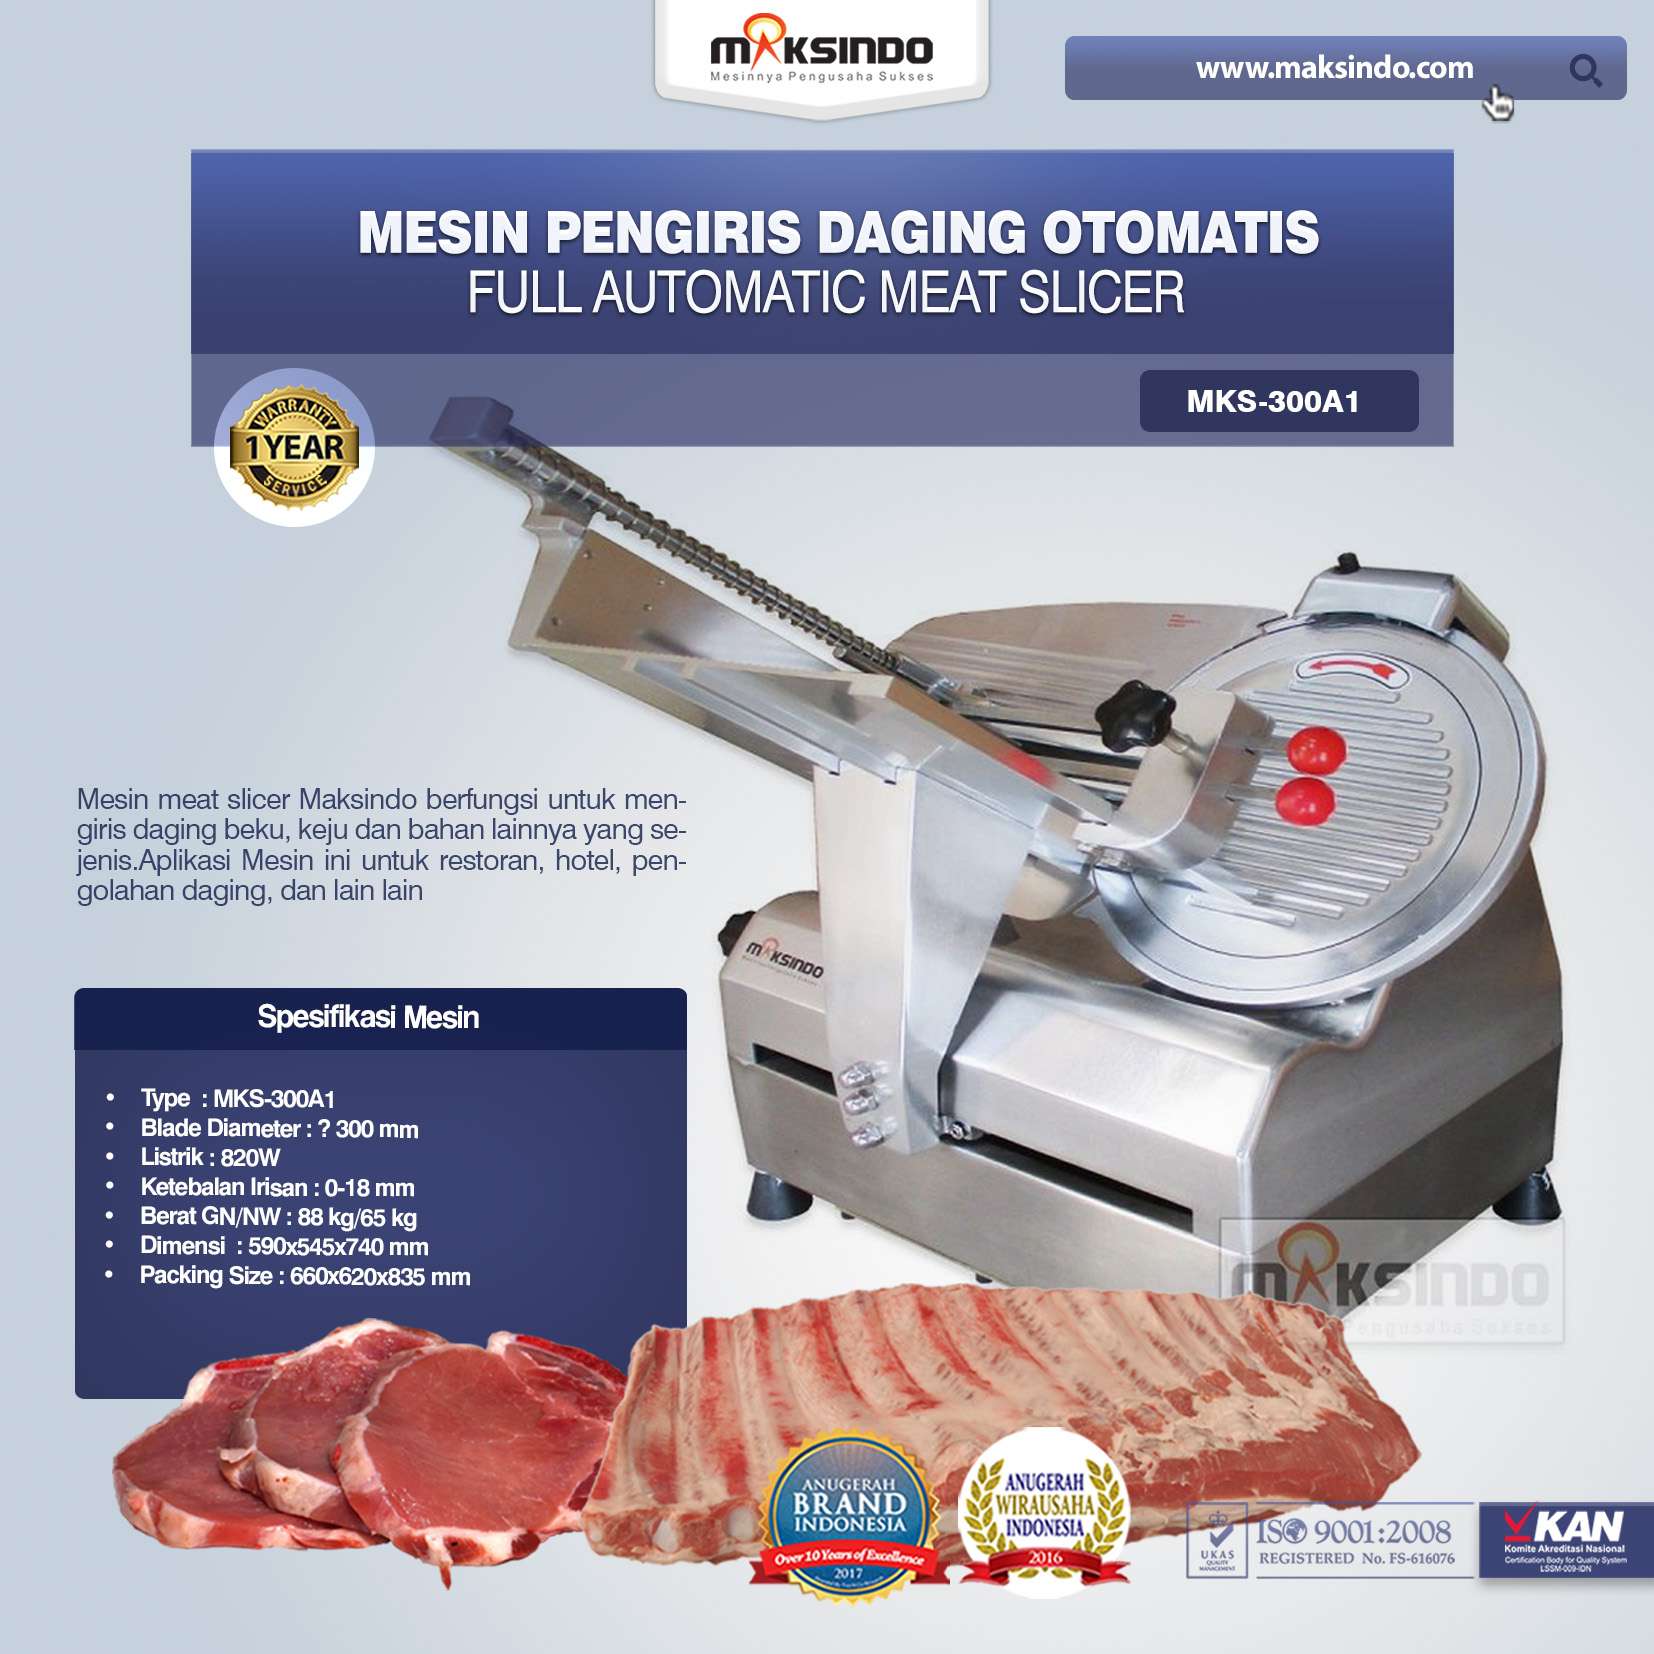 Mesin Full Automatic Meat Slicer MKS-300A1